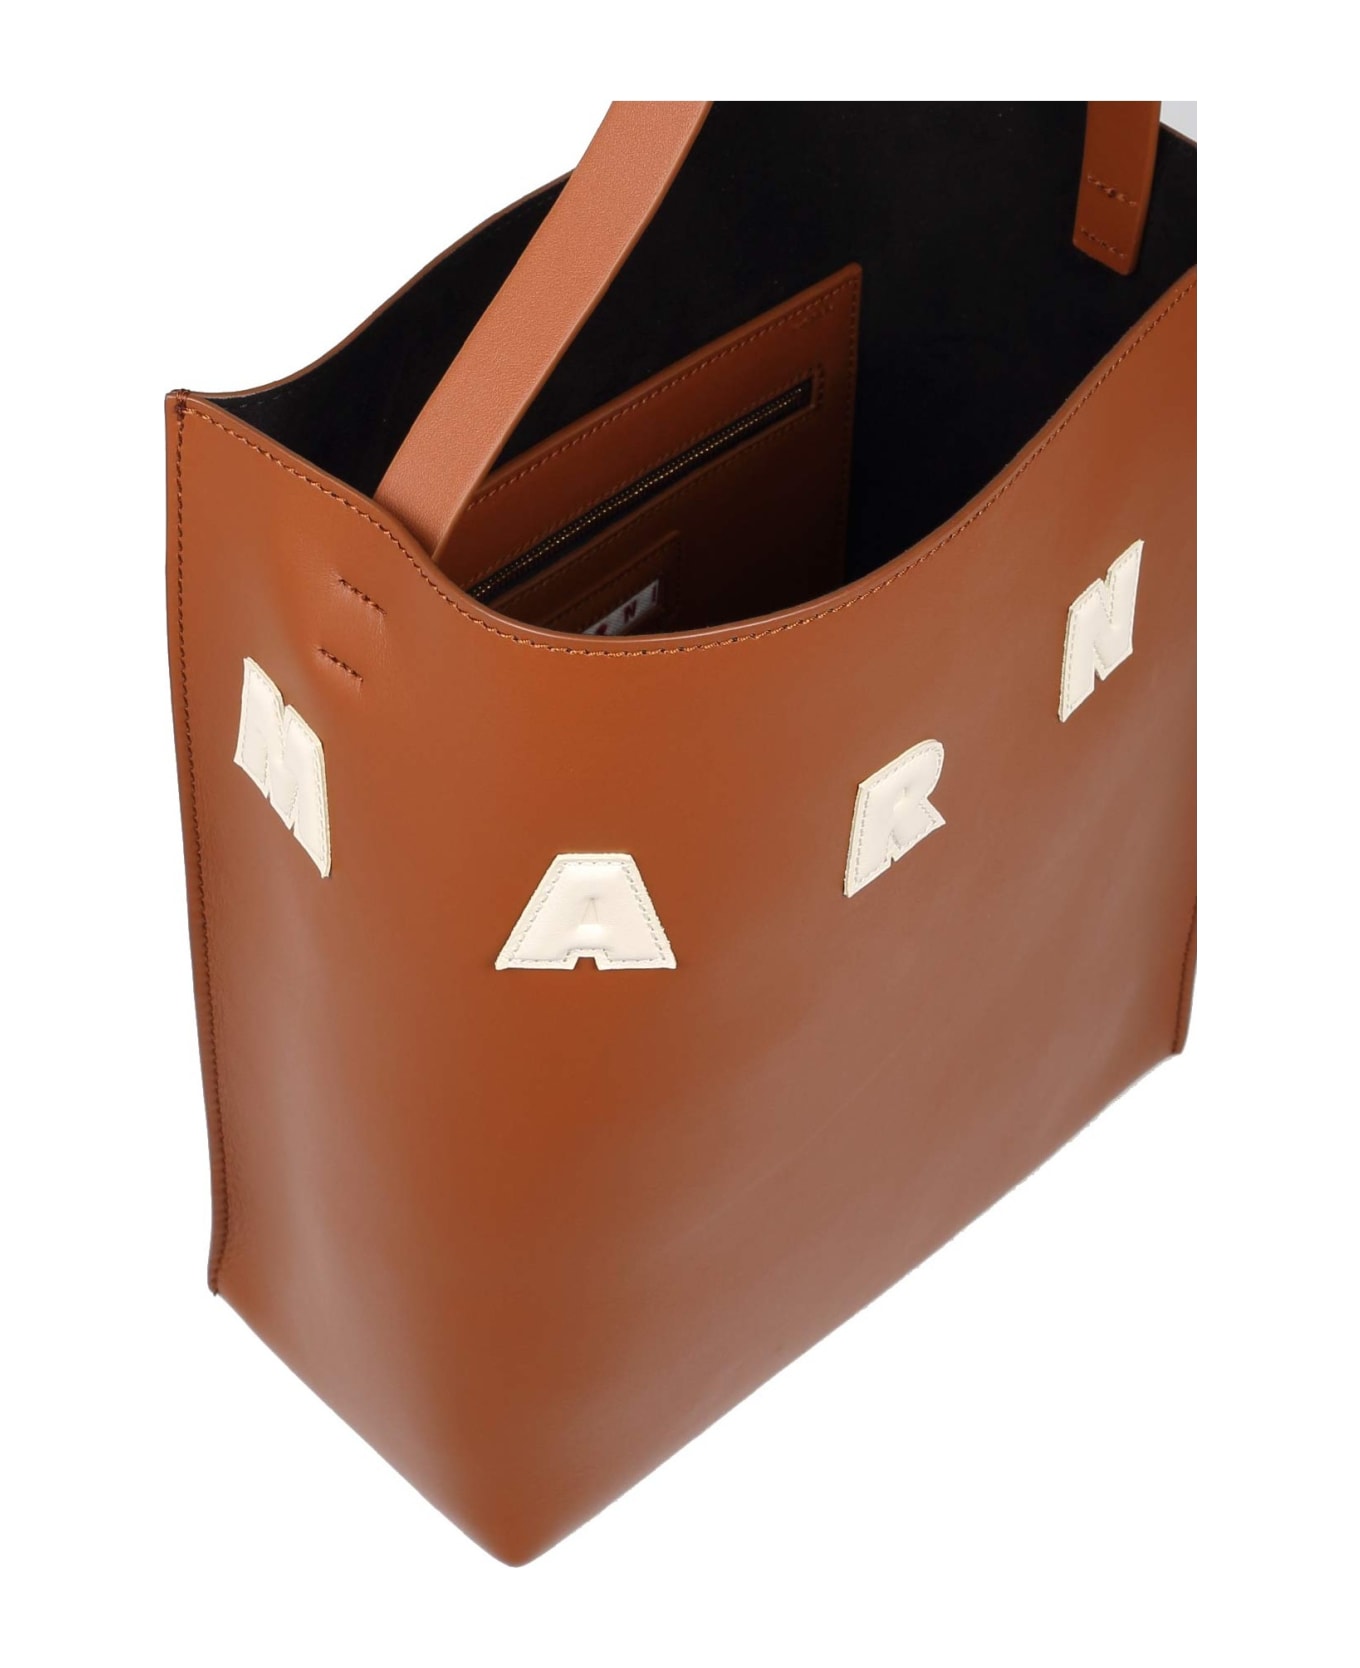 Marni Museo Hobo Bag In Tan Color Leather - Leather ショルダーバッグ